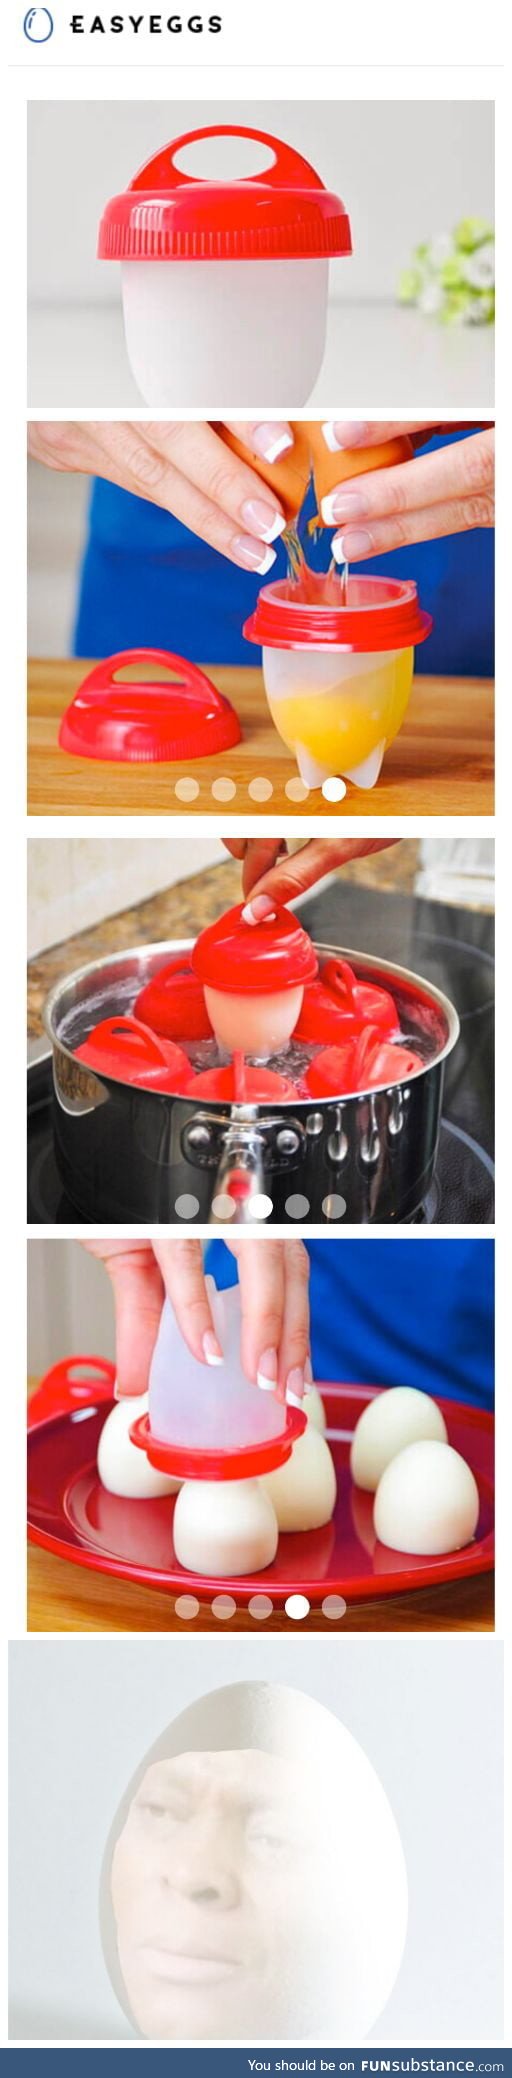 So they invented an Egg Boiling Shell to boil eggs without a shell. It is made of plastic